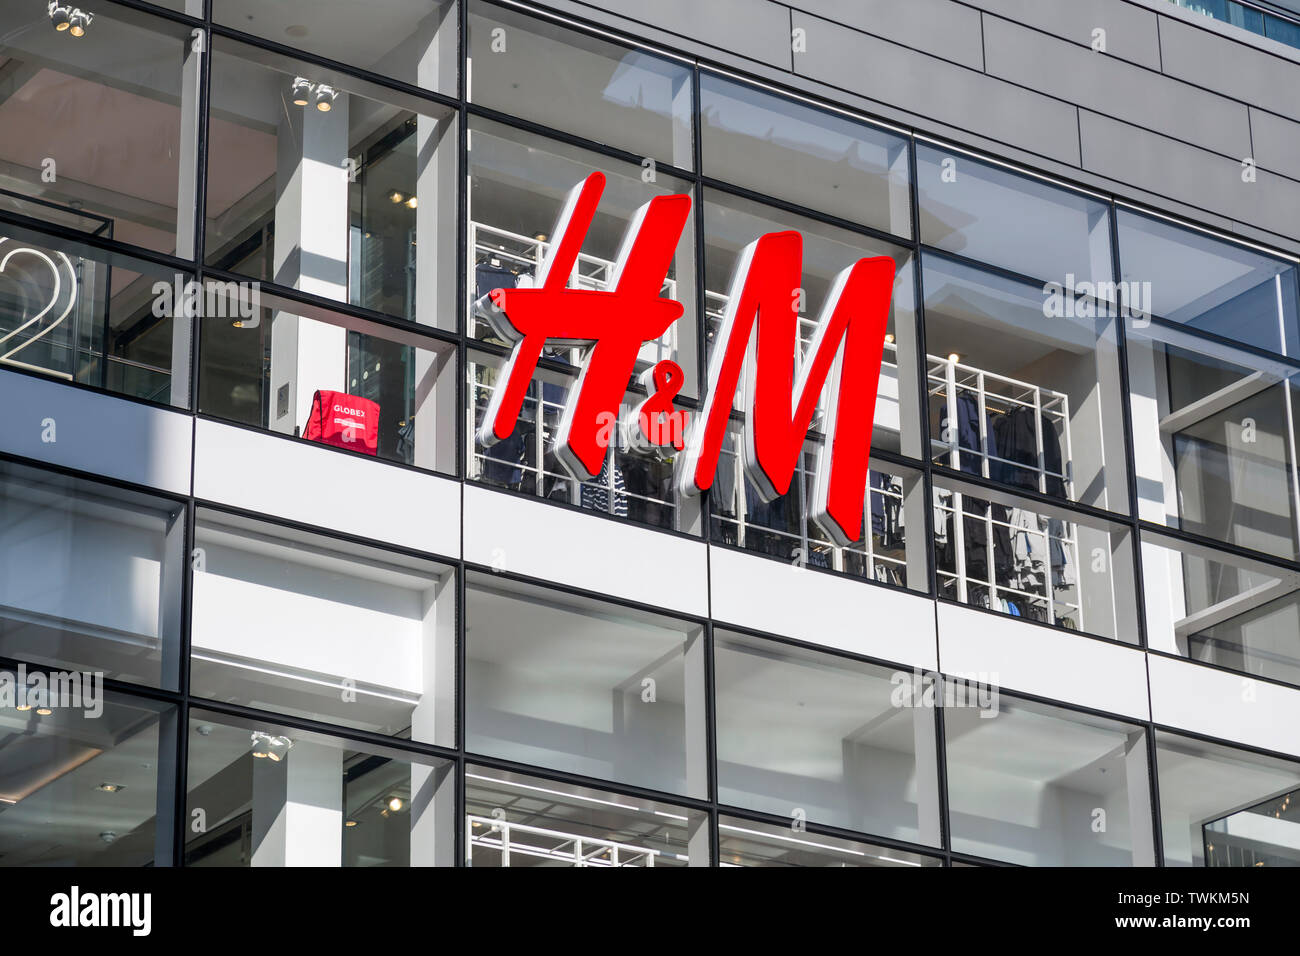 H&m Shop High Resolution Stock Photography and Images - Page 6 - Alamy